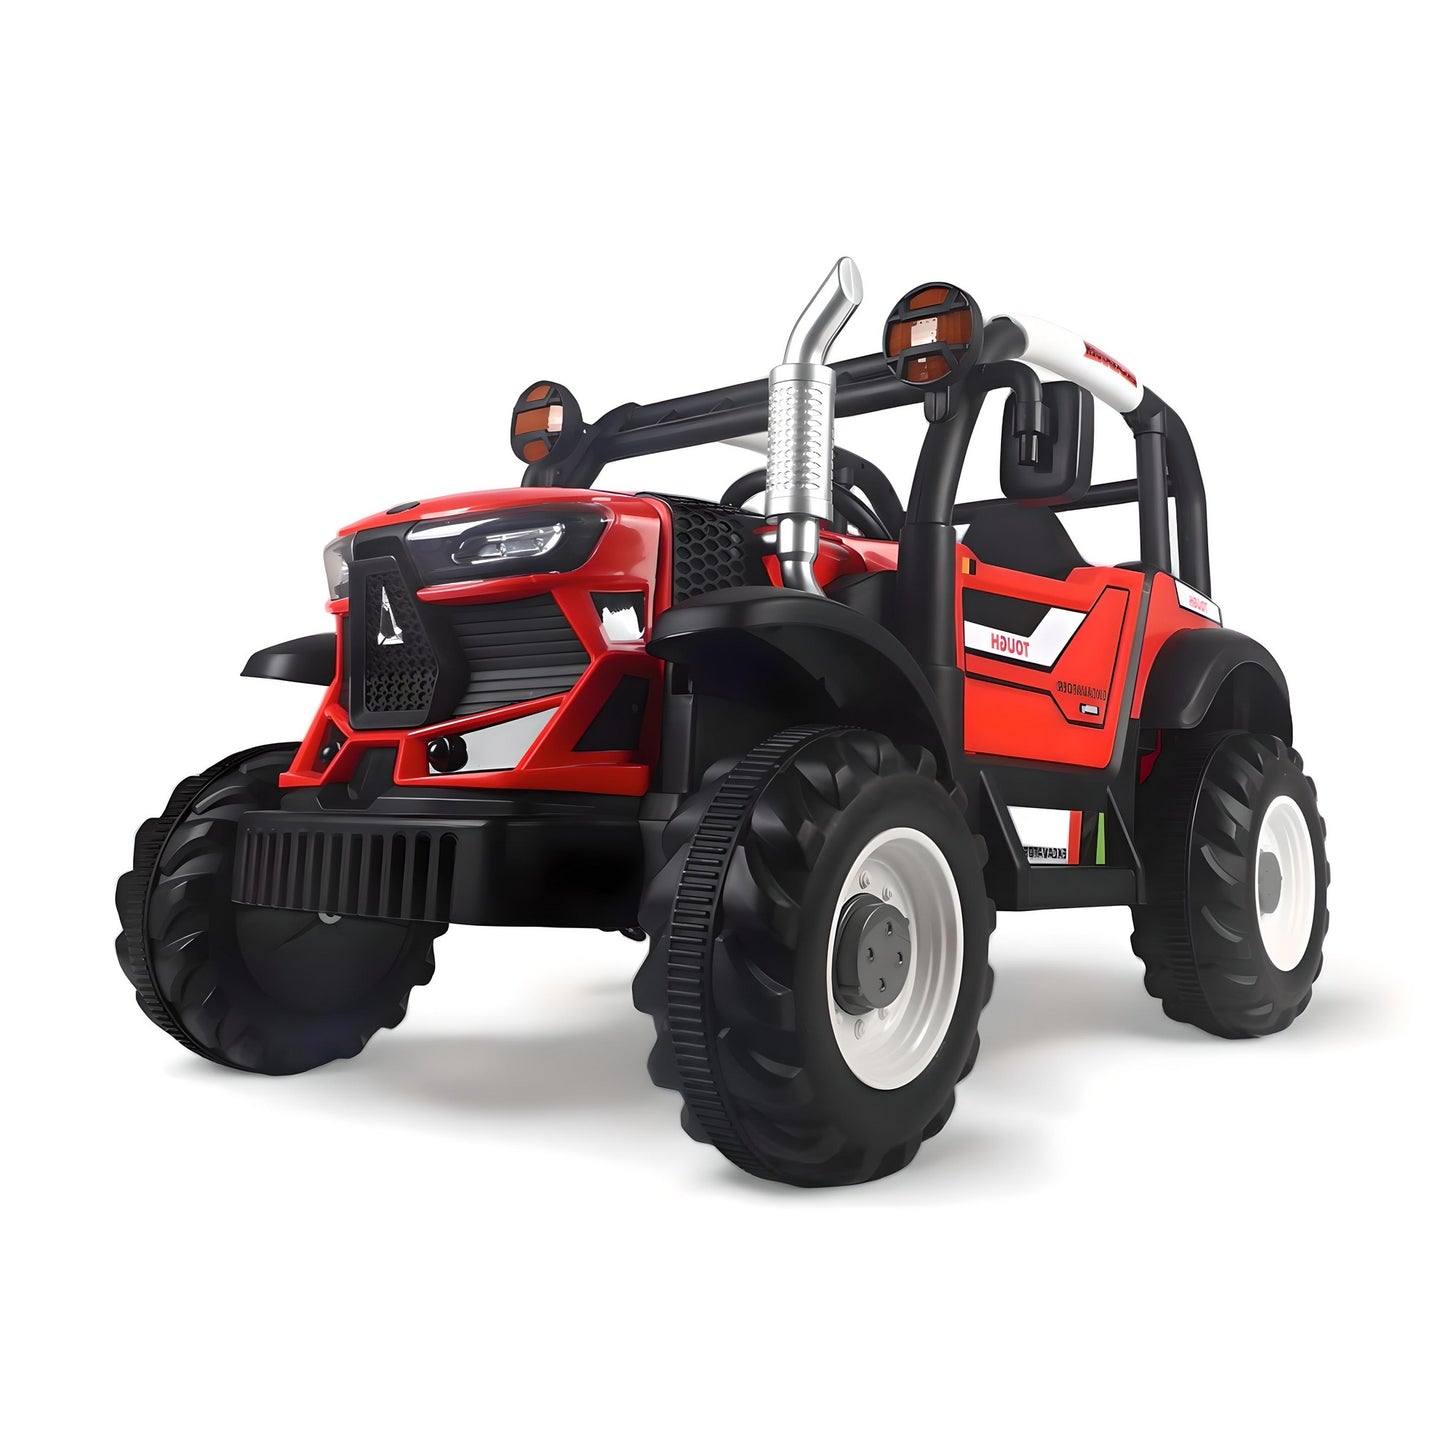 AYAAN TOYS a top-Tier Kids Electric Ride-On Tractor Featuring Dual Control, a Realistic Design, Musical Entertainment, Safe Driving Features, Durable, and Bluetooth Connectivity, Aged 2-9-Red